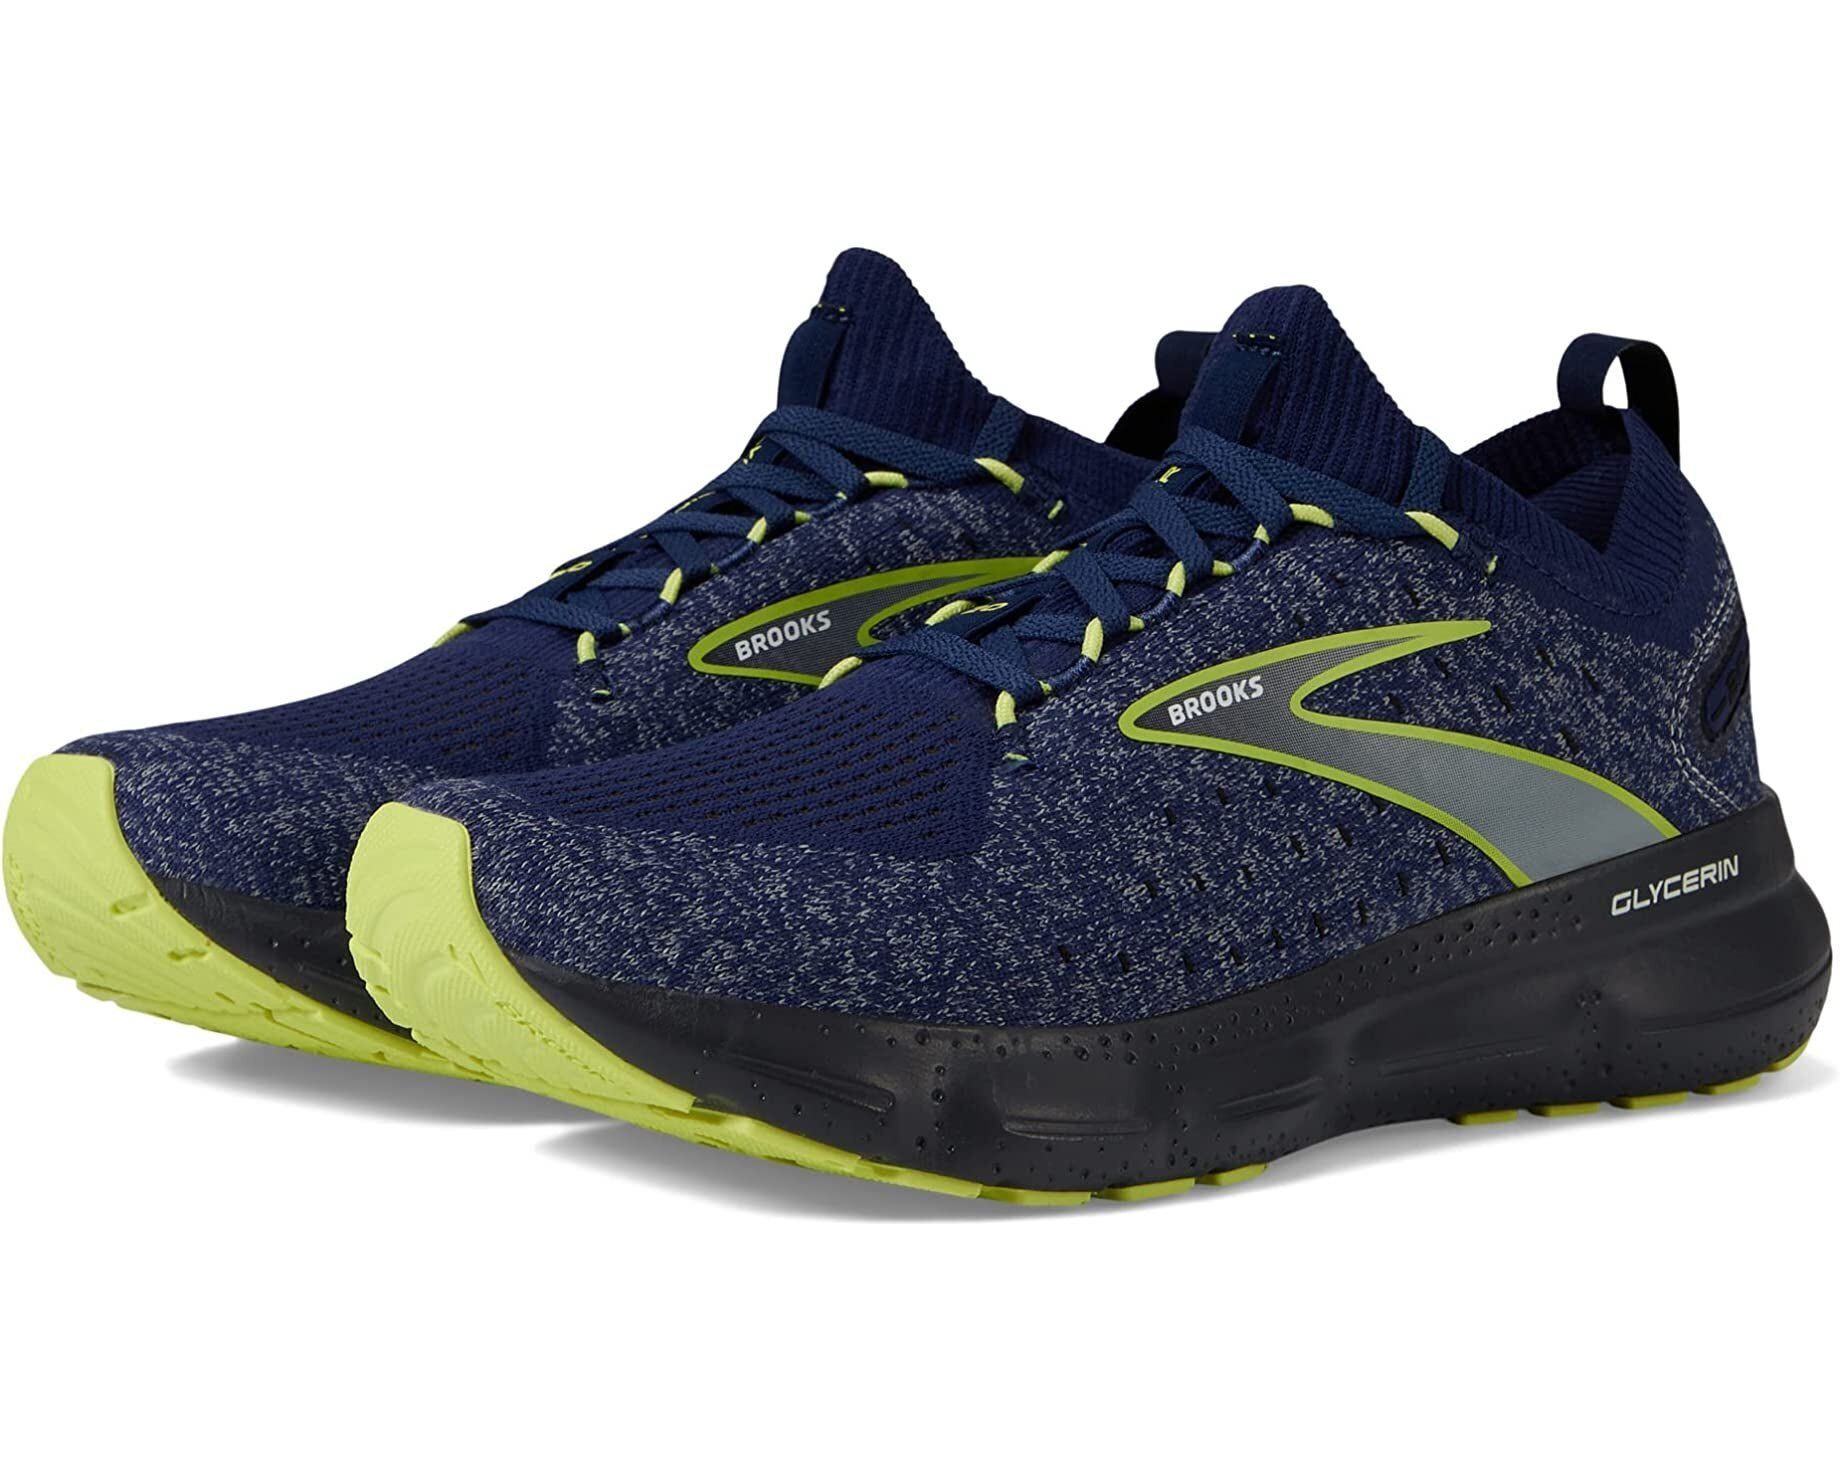 Highly-Rated Men's Running Shoes That Will Put A Spring In Your Step